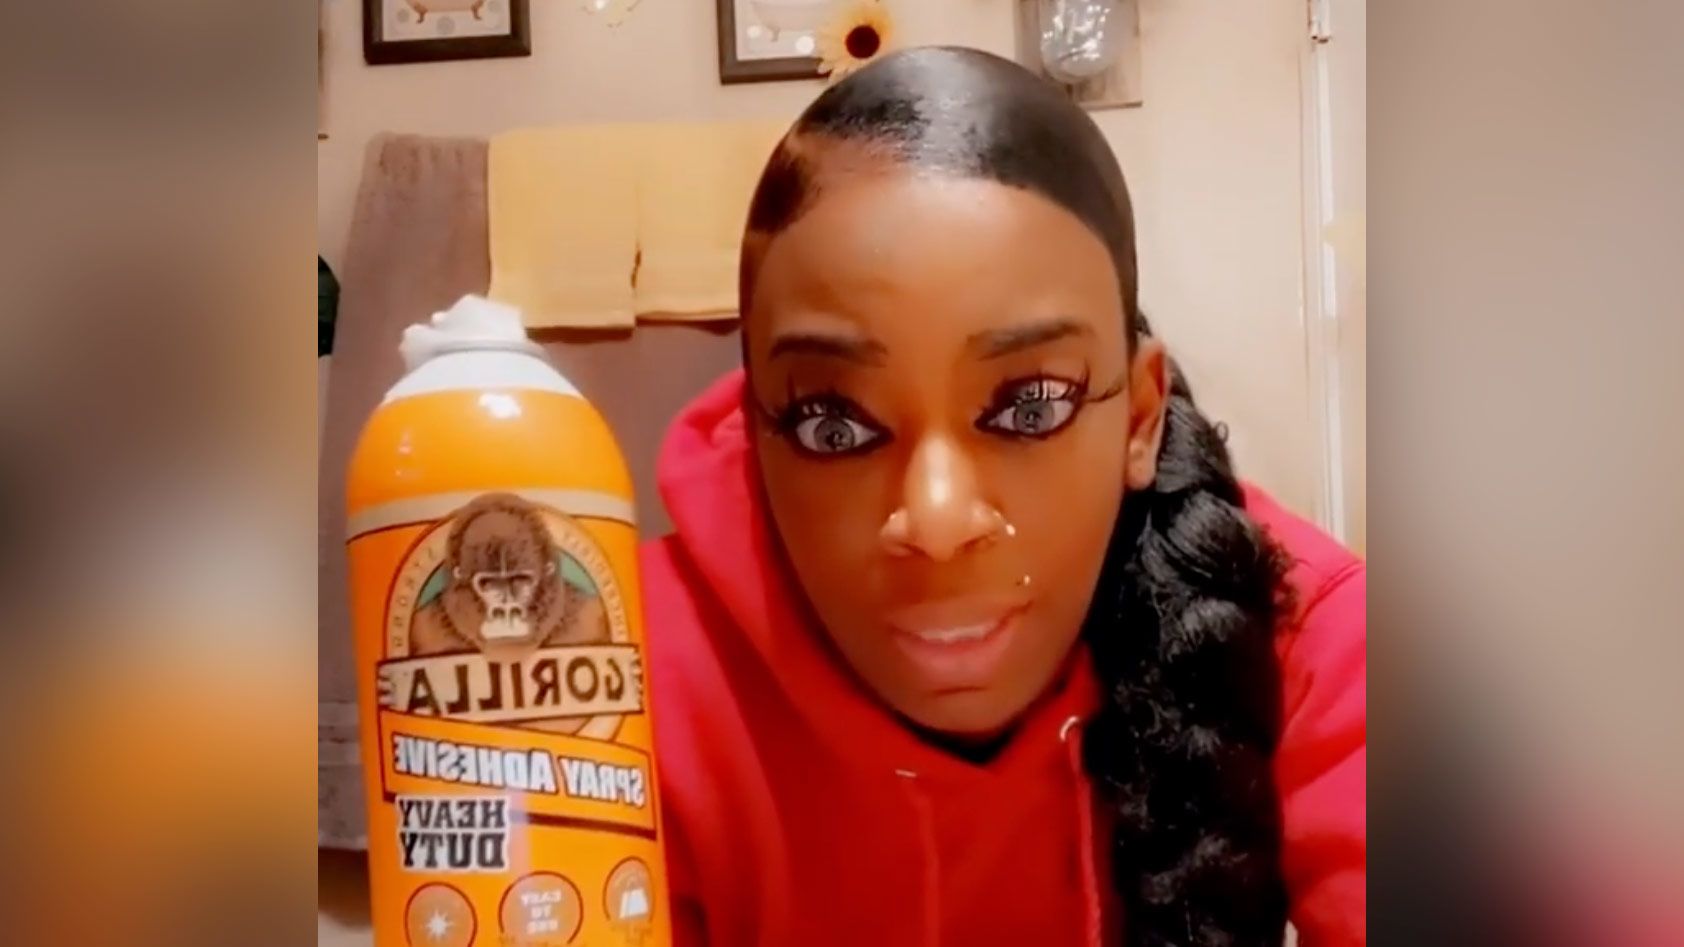 Gorilla Glue Girl' who accidentally stuck her hair to her head